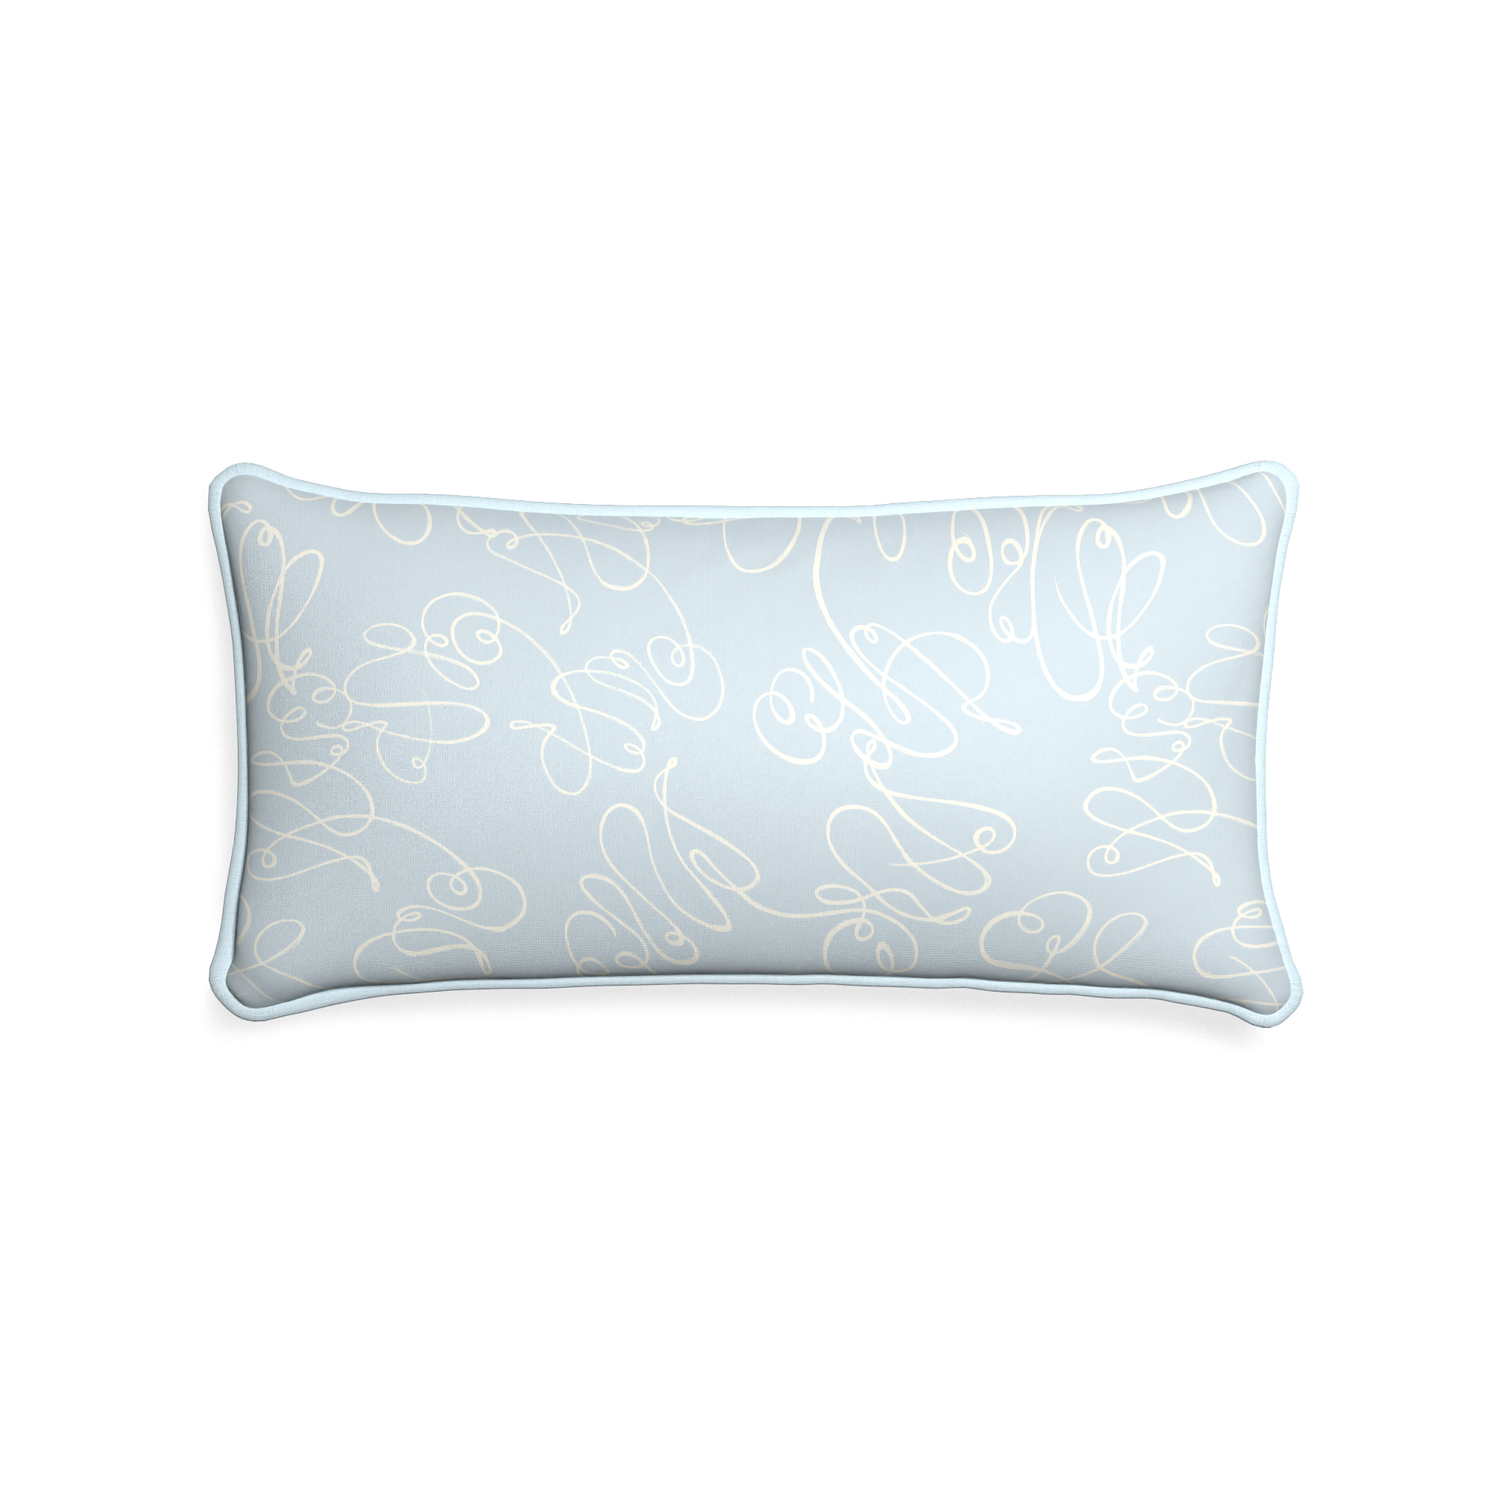 Midi-lumbar mirabella custom powder blue abstractpillow with powder piping on white background